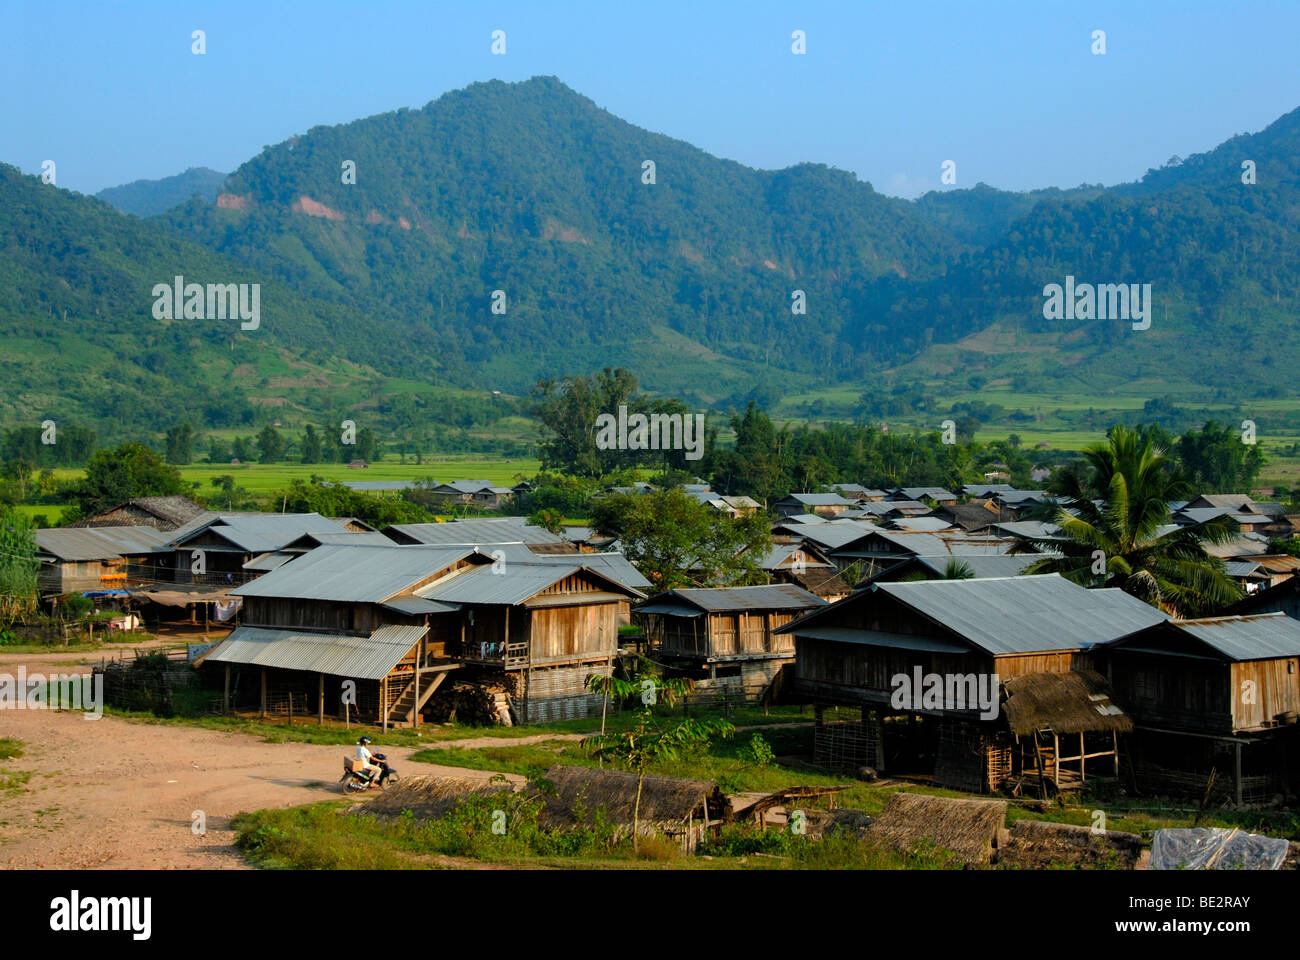 Village with huts made of wood and corrugated iron roofs in a valley, Ou Tai, Gnot Ou district, Yot Ou, Phongsali, Phongsali pr Stock Photo